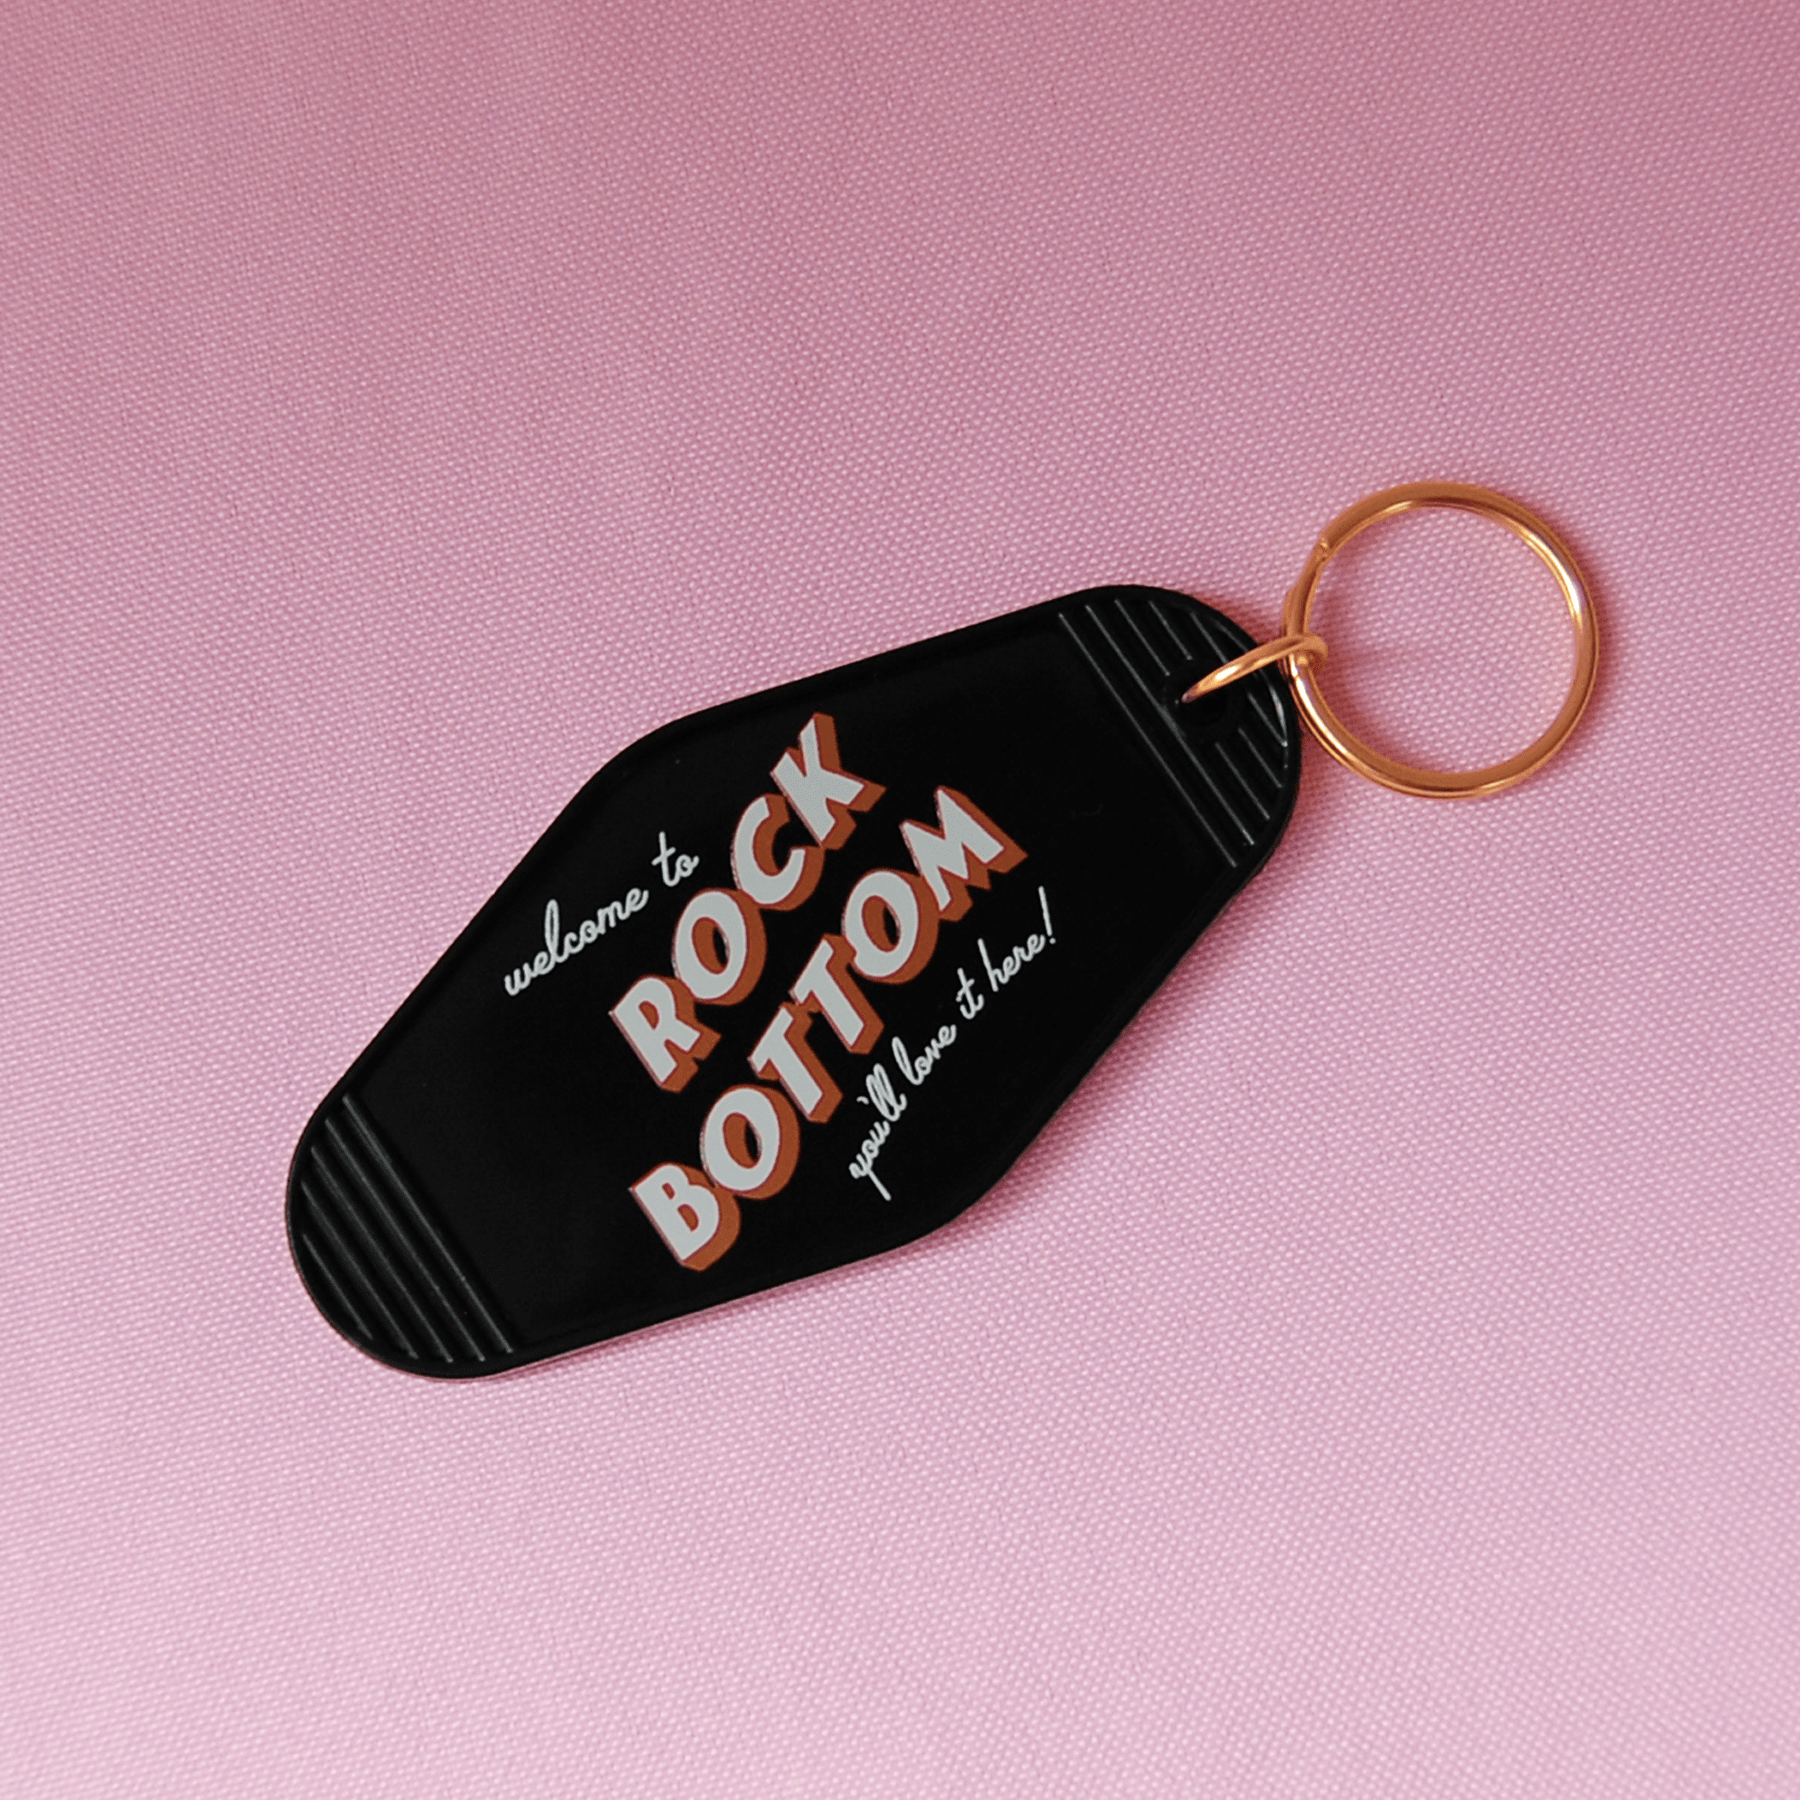 A Shop of Things Accessories Rock Bottom Motel Keychain